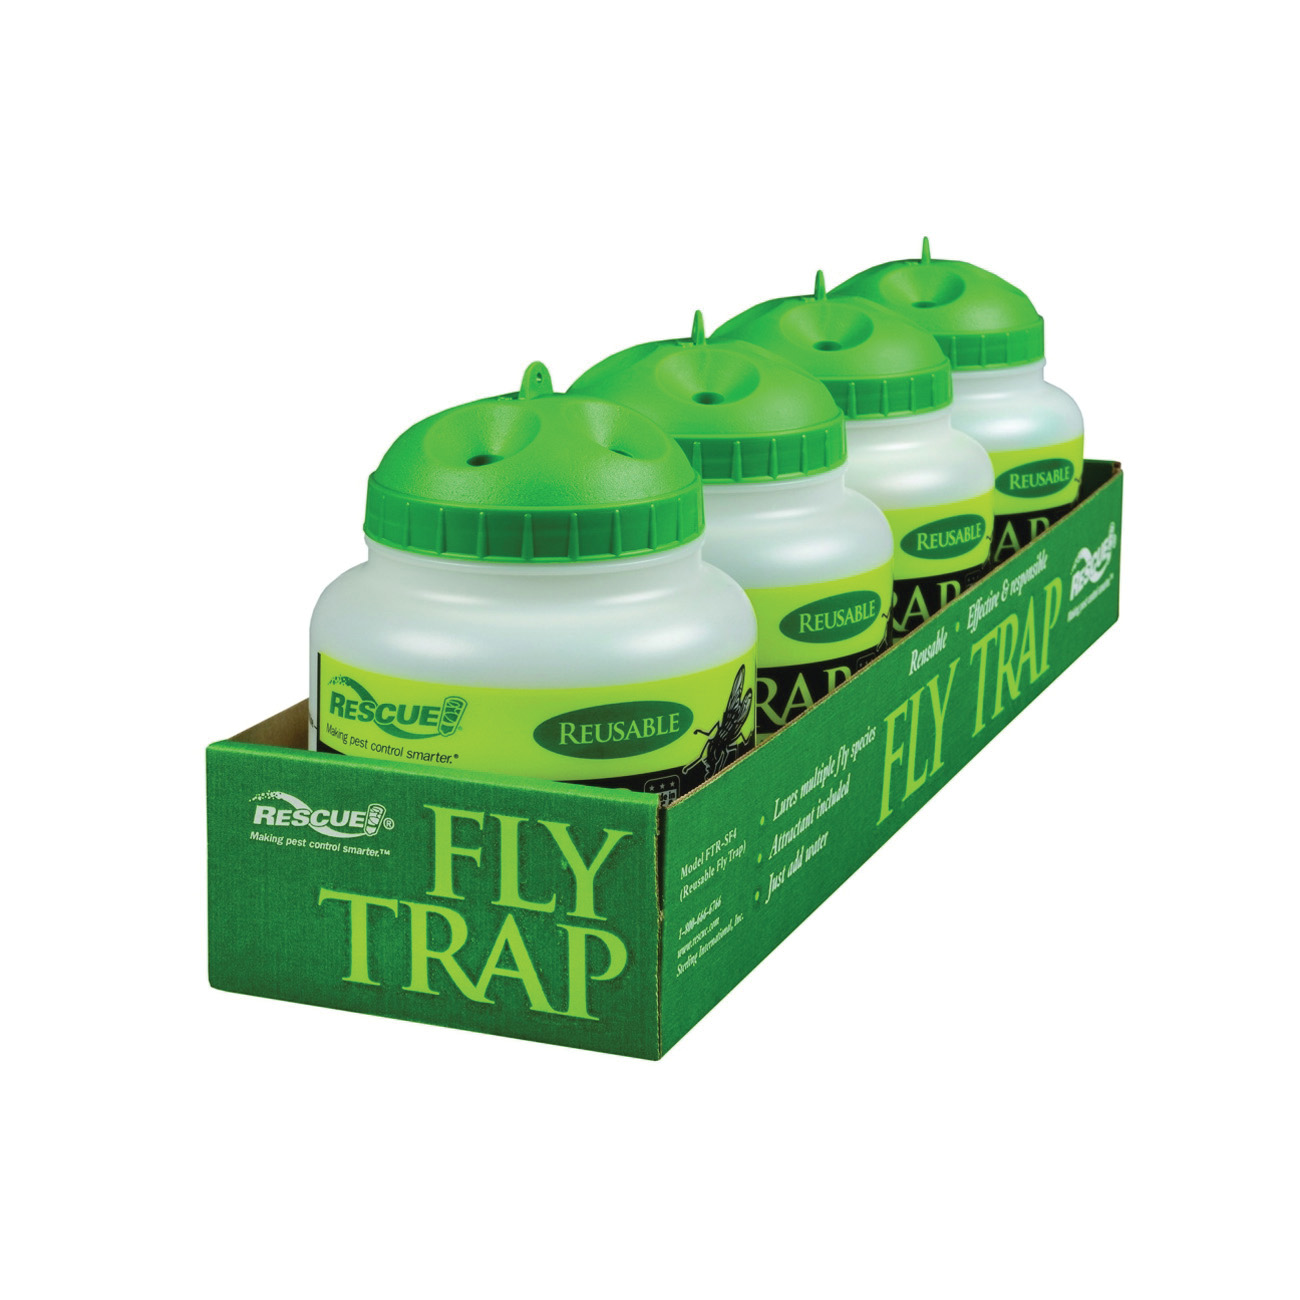 Rescue FTR-SF4 Fly Trap Refill, Solid, Musty, Refill Pack - 2